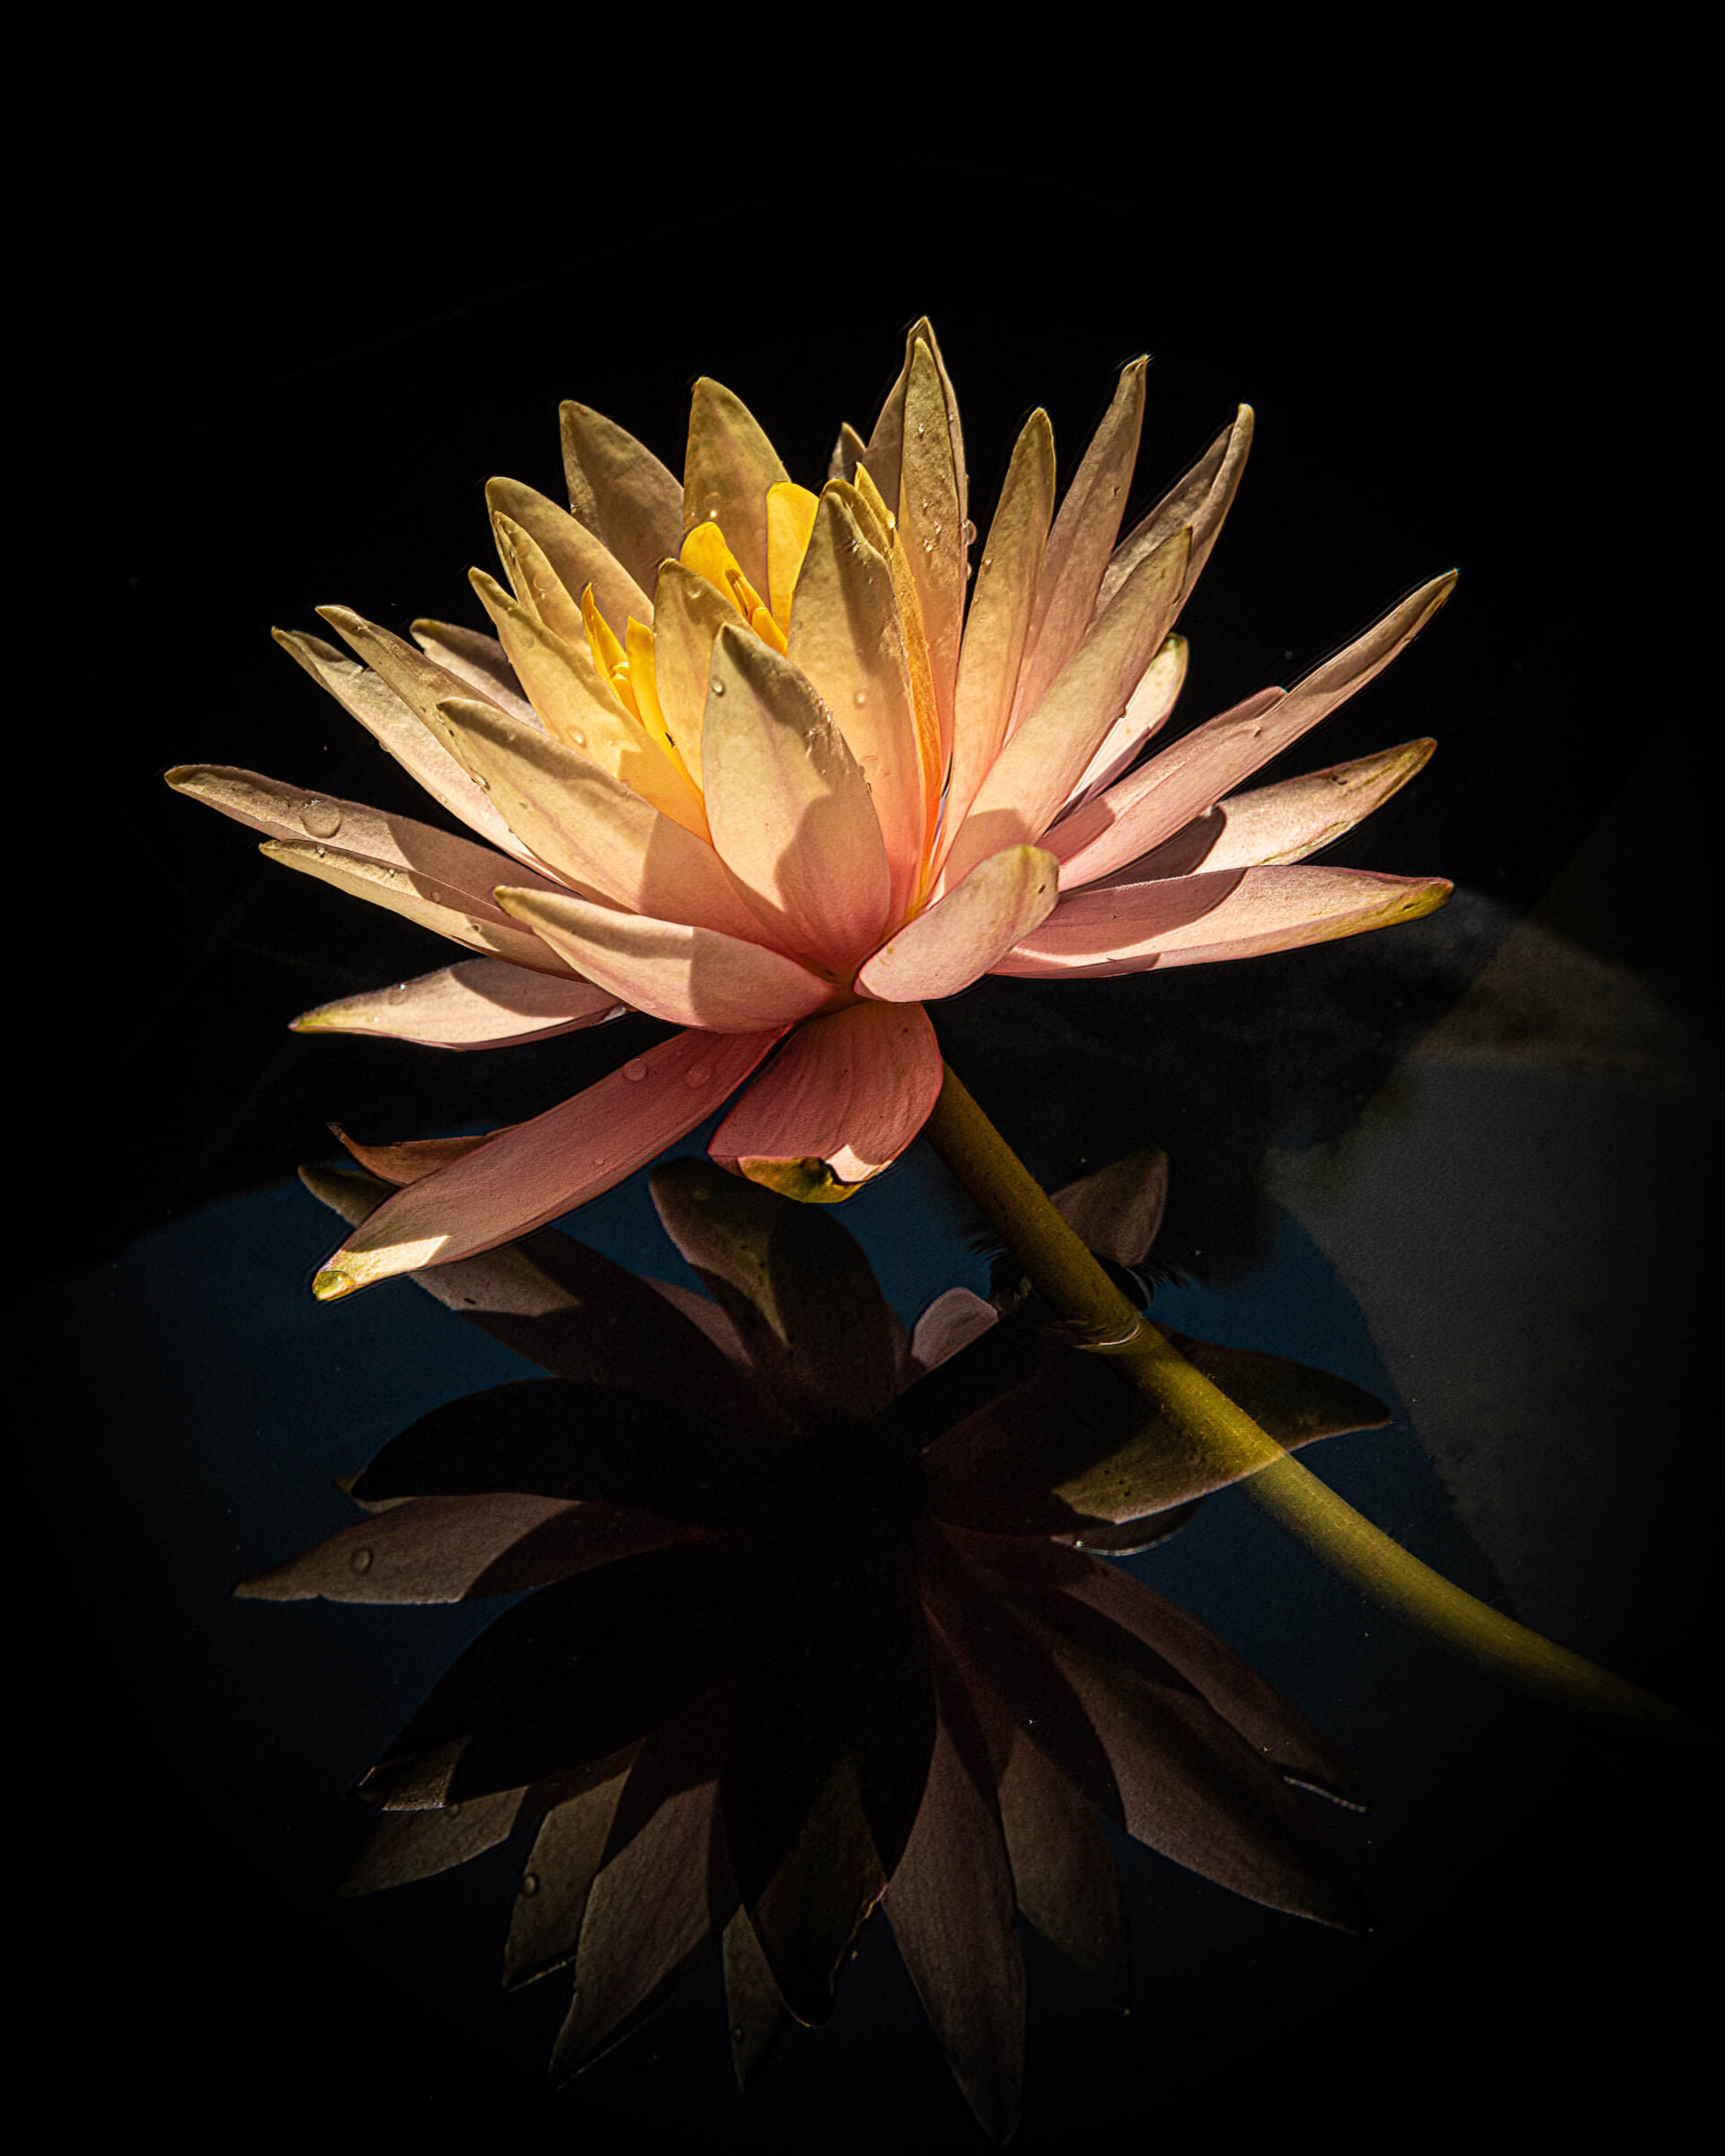 A side view photograph of a water lily with it's reflection.